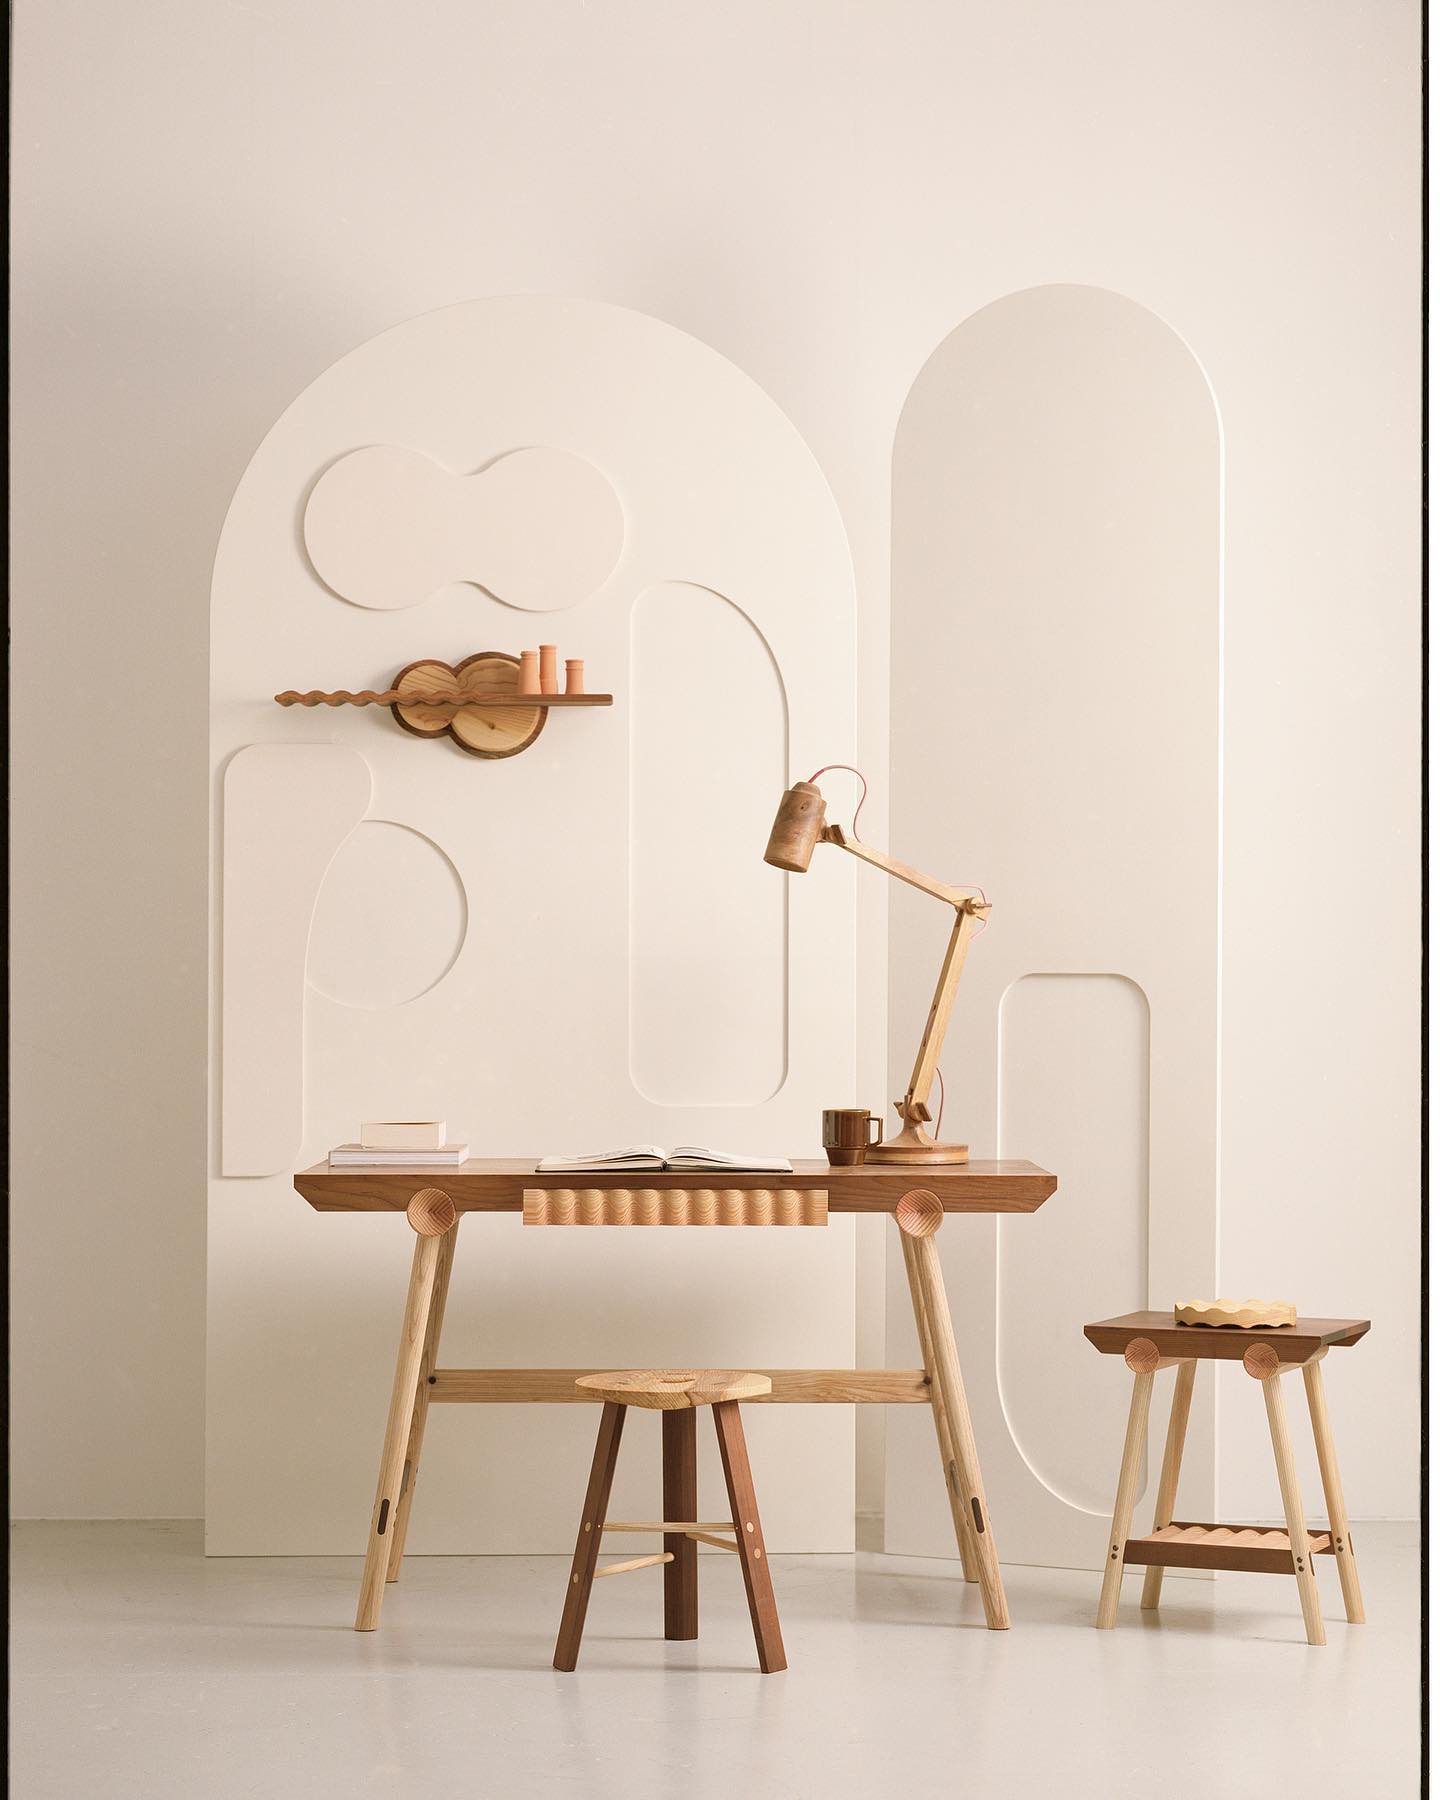 bowater-desk-shelf-side-table-and-cable-shop-stool-shot-against-a-set-designed-by-the-incredible-@li